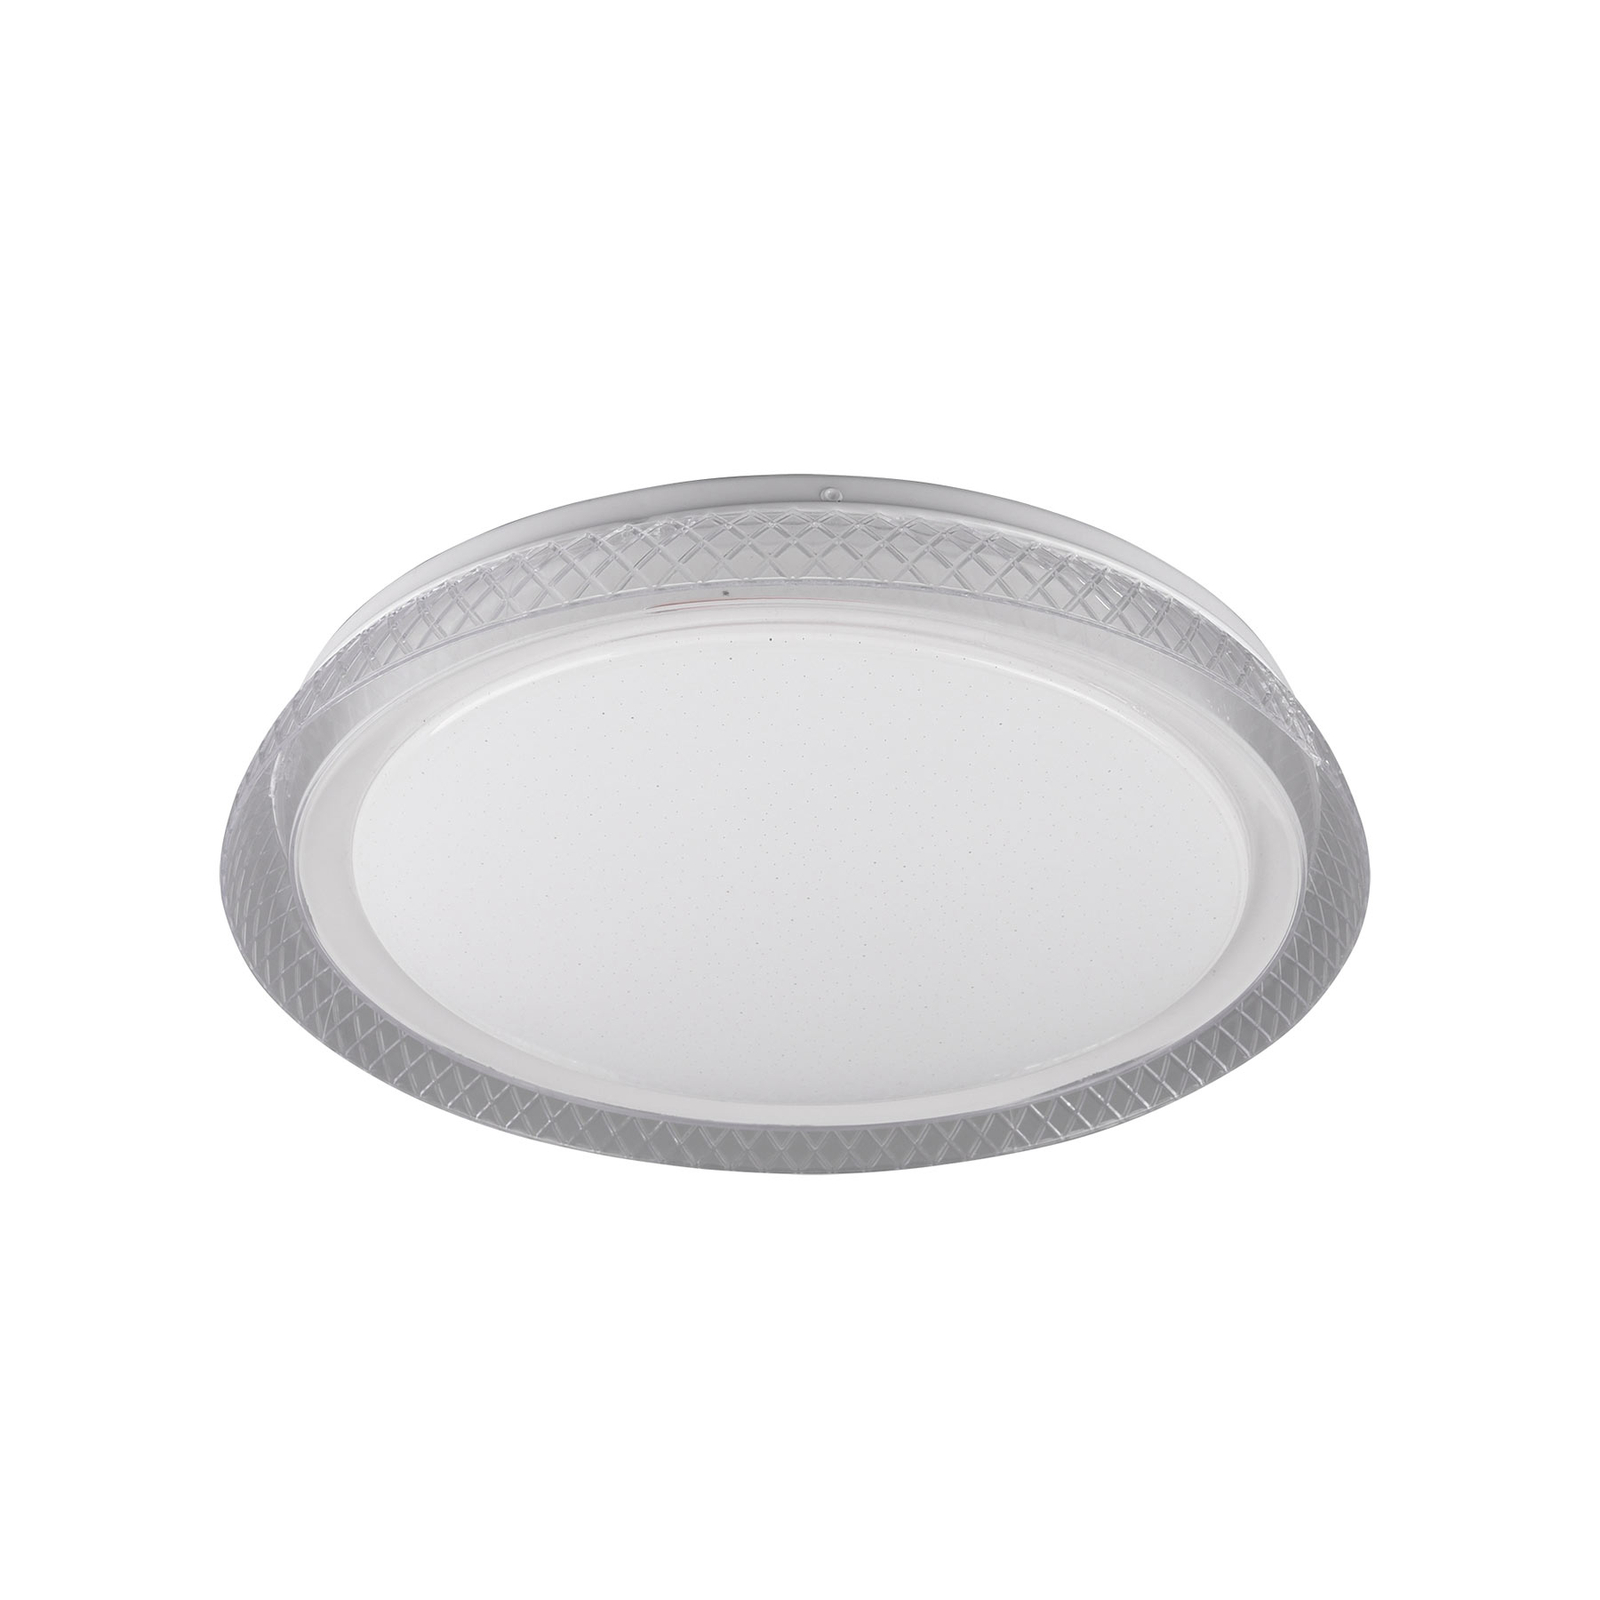 LED-taklampe Heracles, tunable white, Ø 38 cm